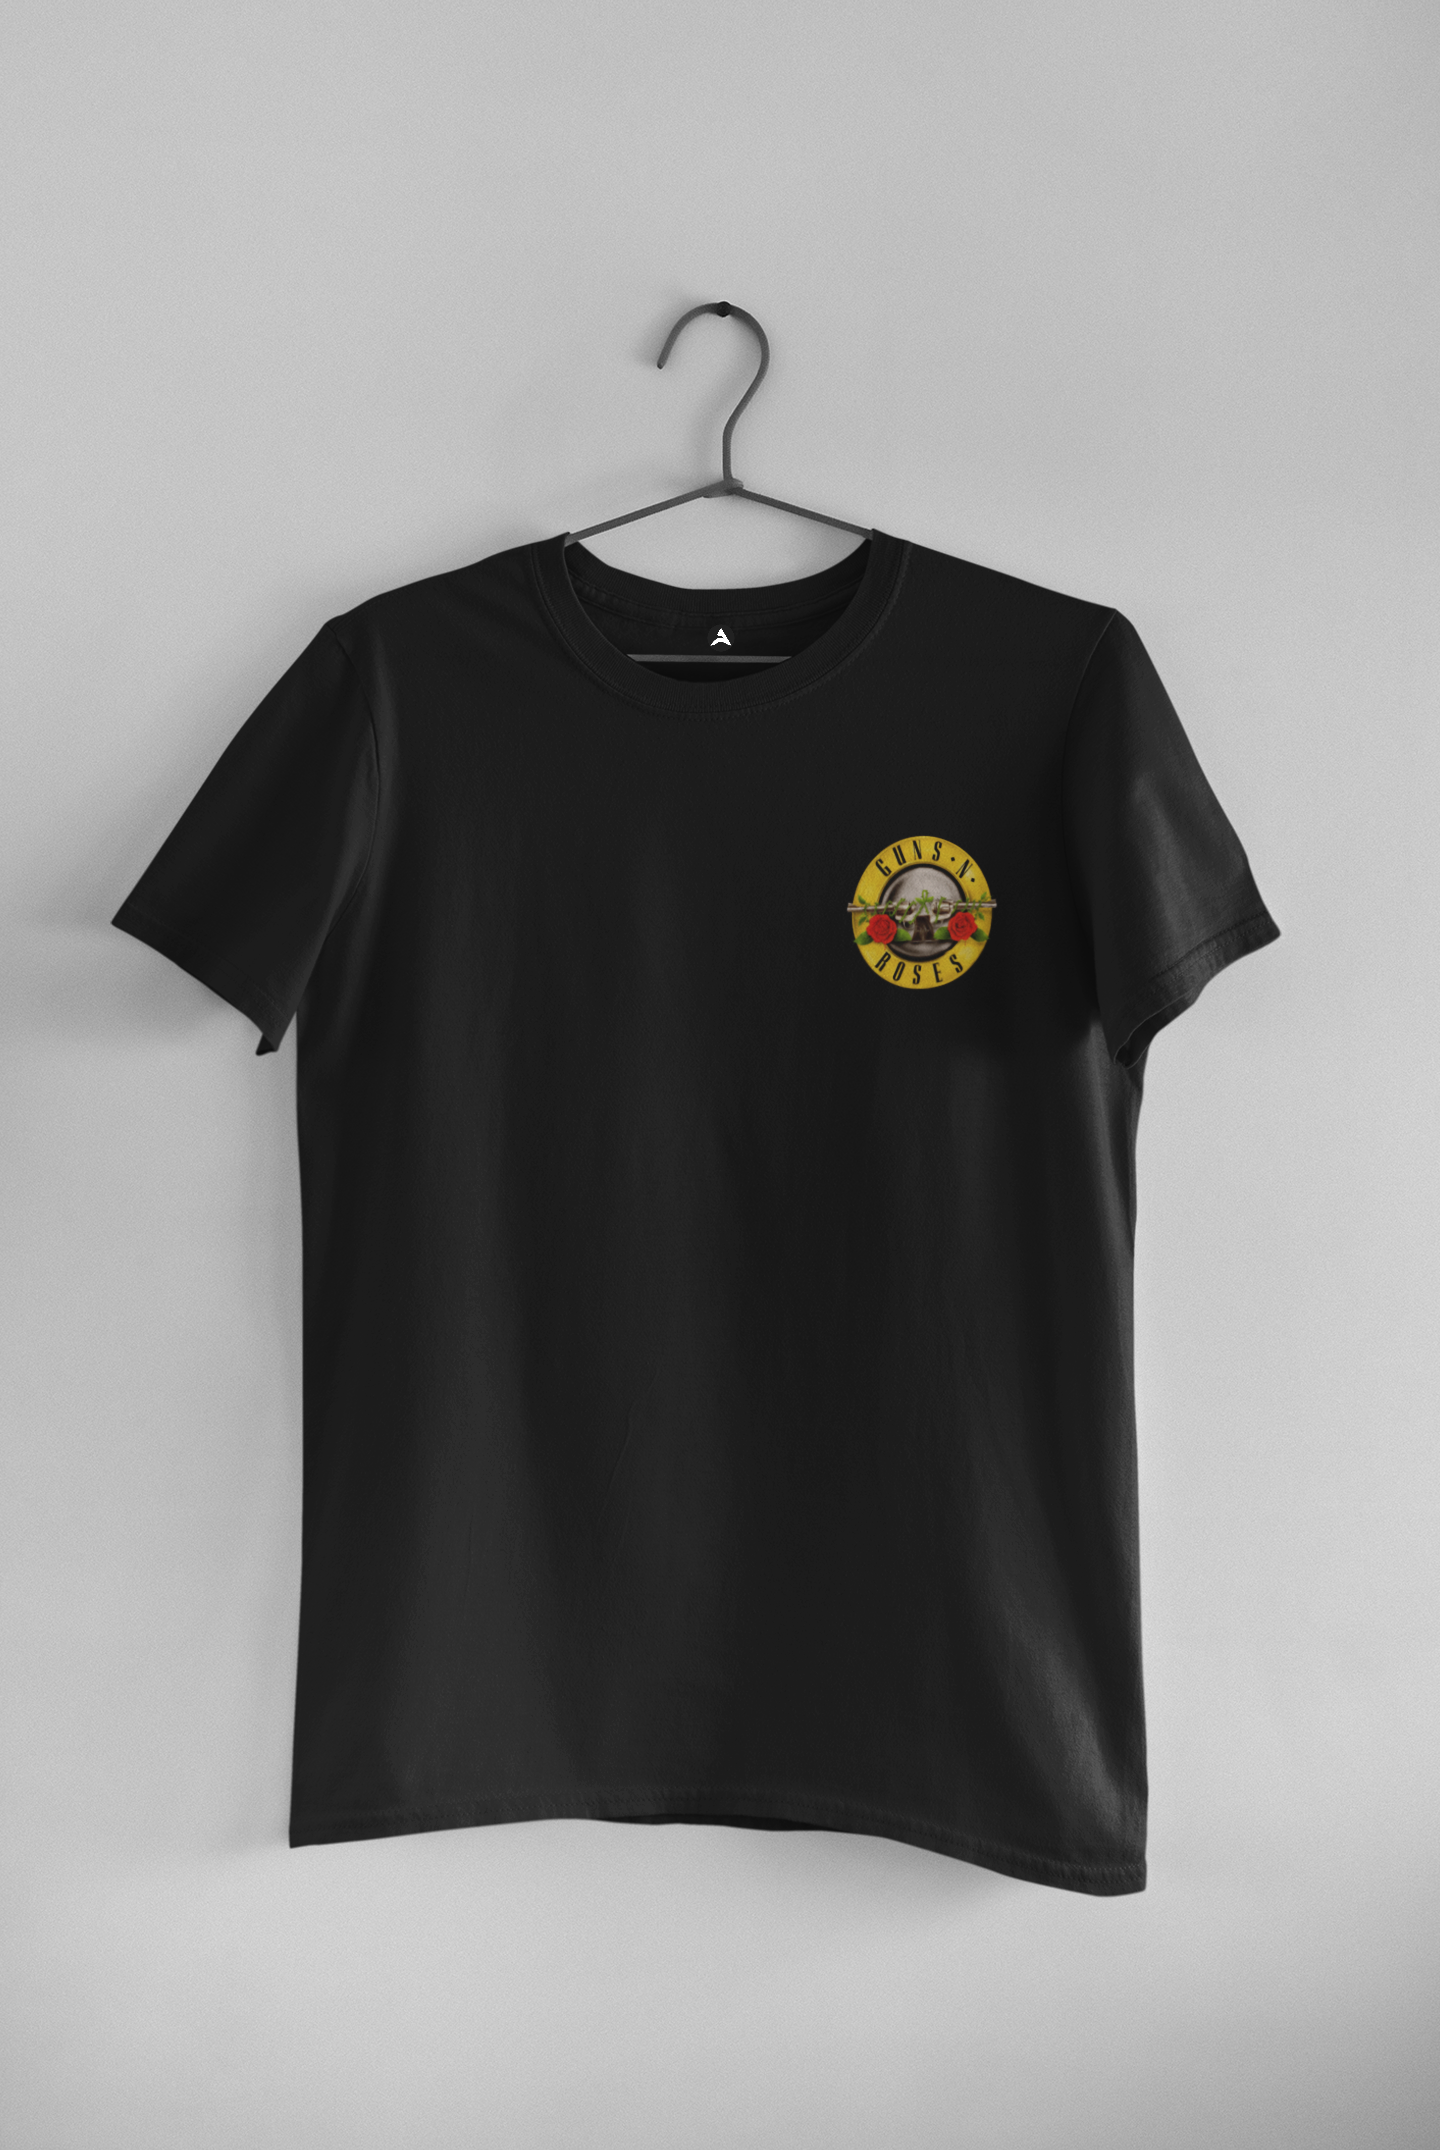 Guns & Roses (Double Sided Print): Music & Bands- Half Sleeve T-Shirts BLACK